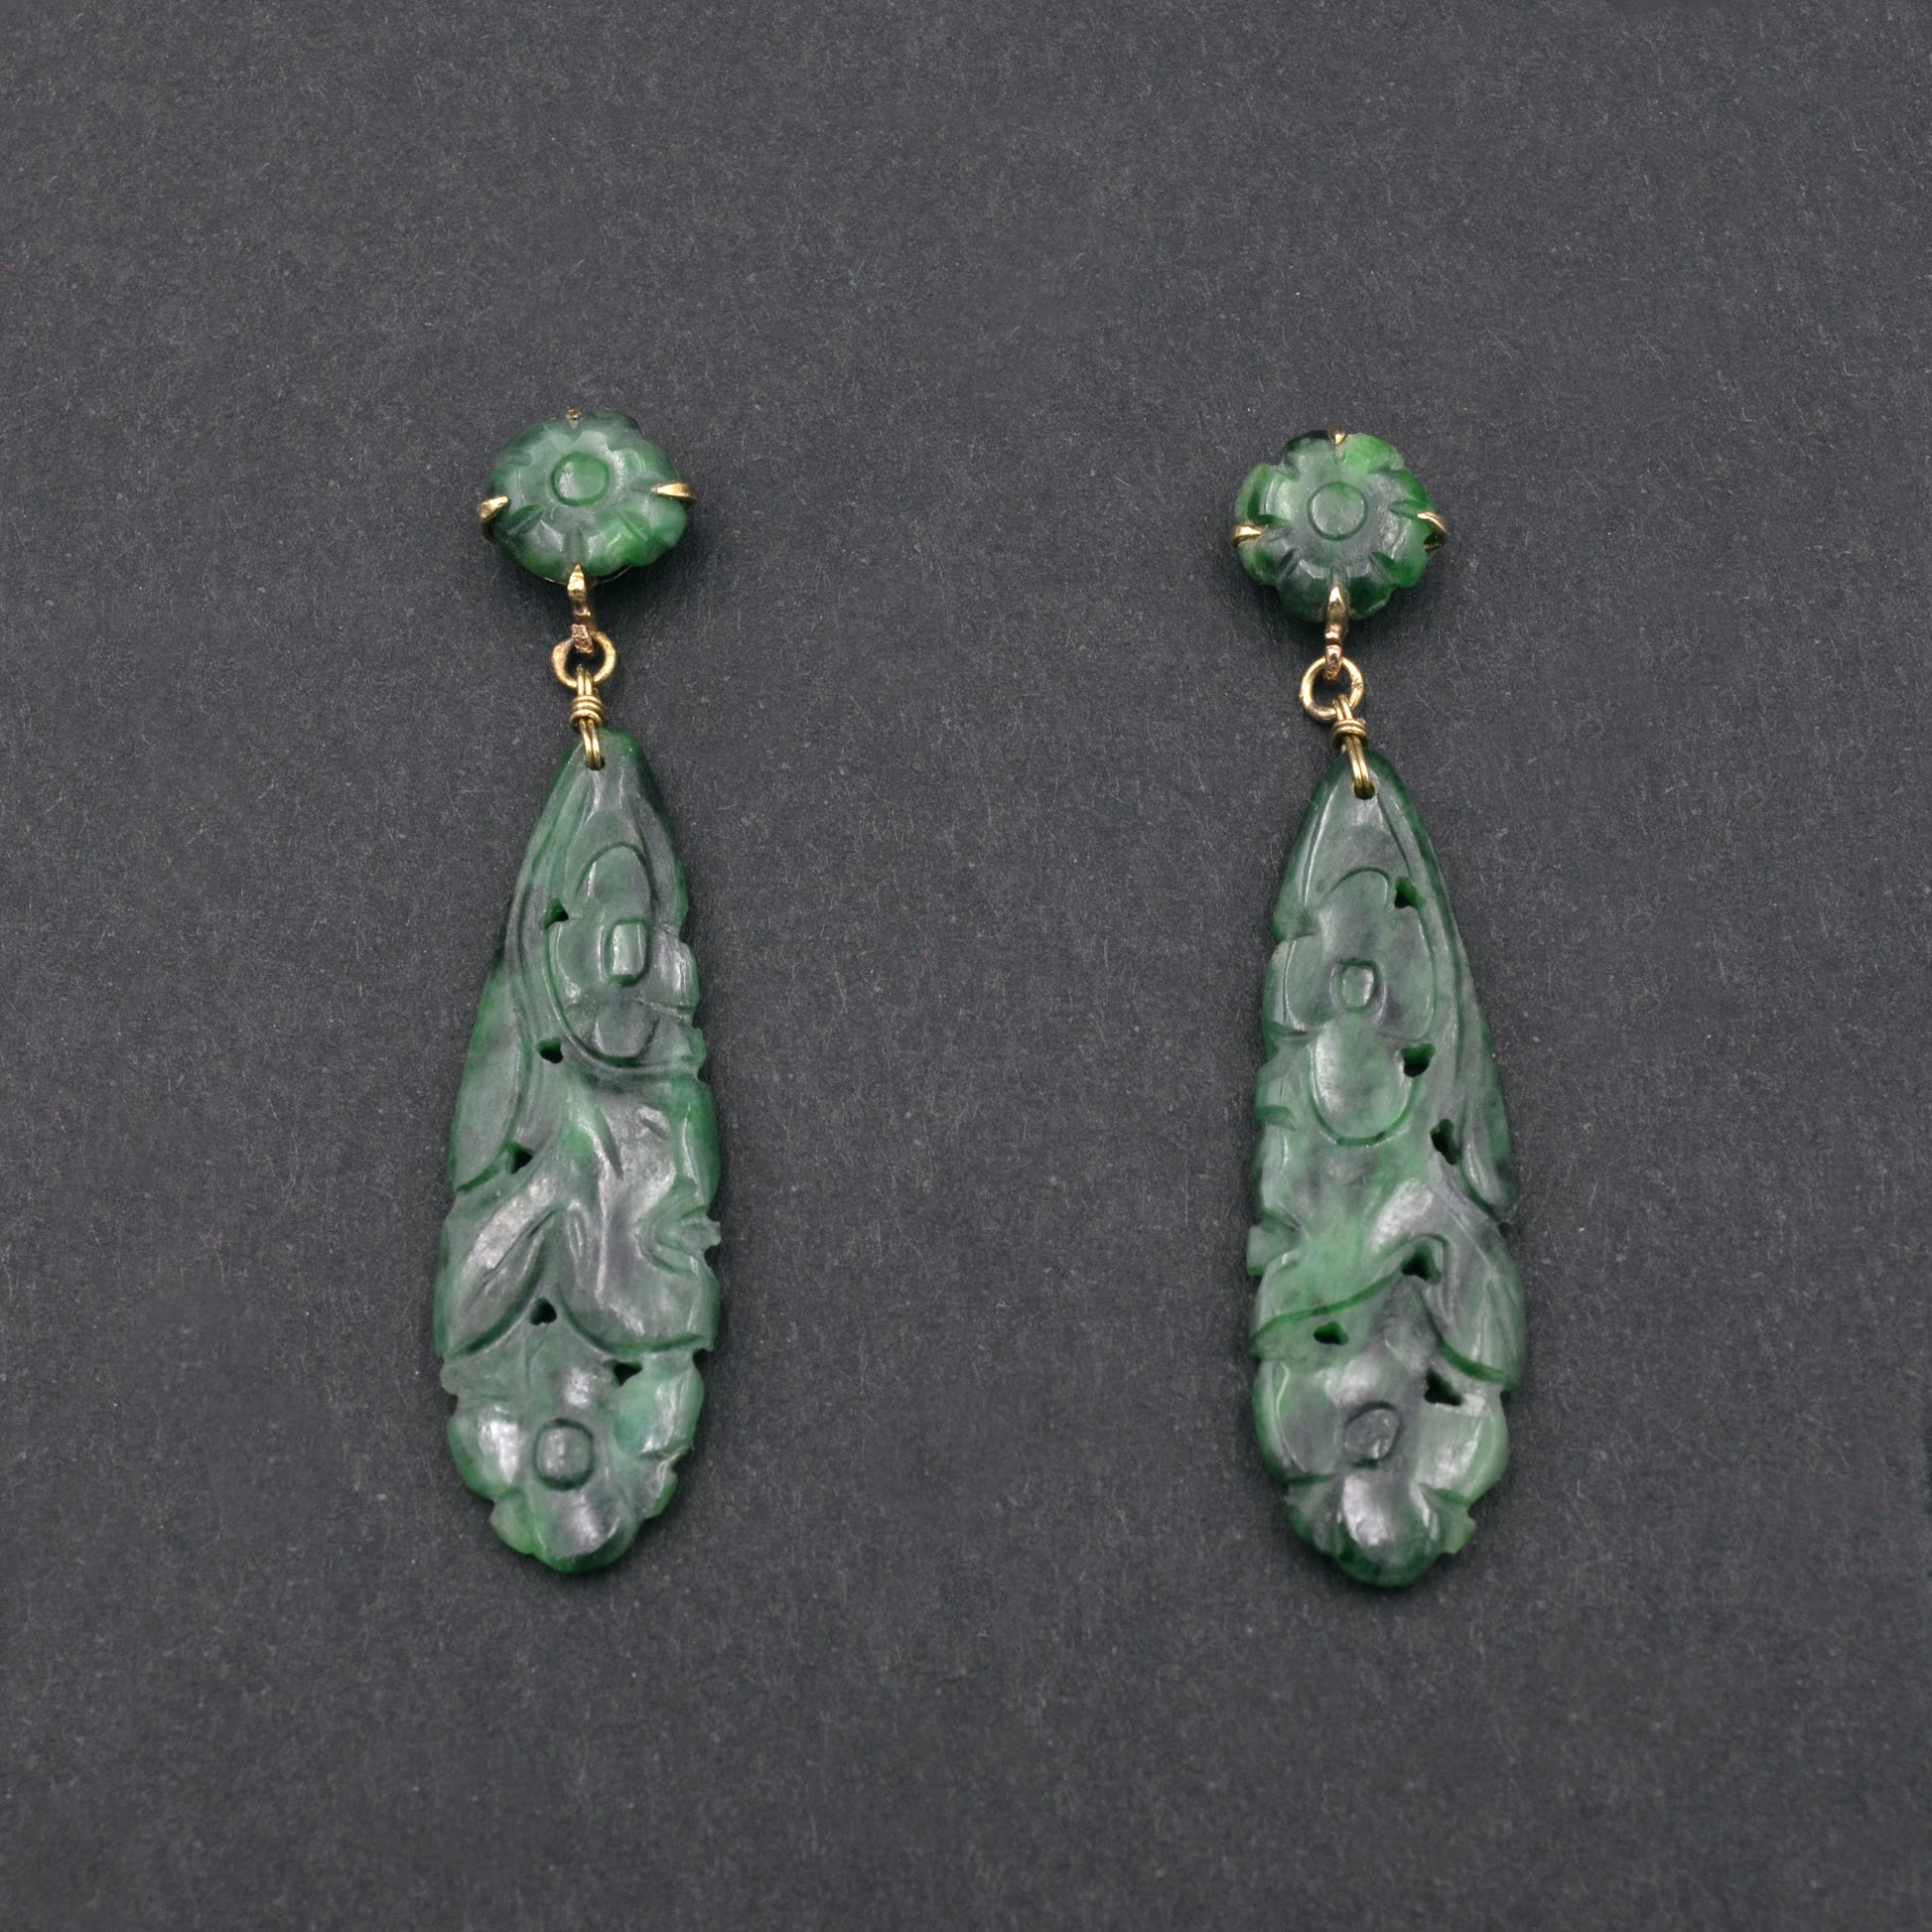 Art Deco 14k Gold Chinese Carved Jade Antique Earrings